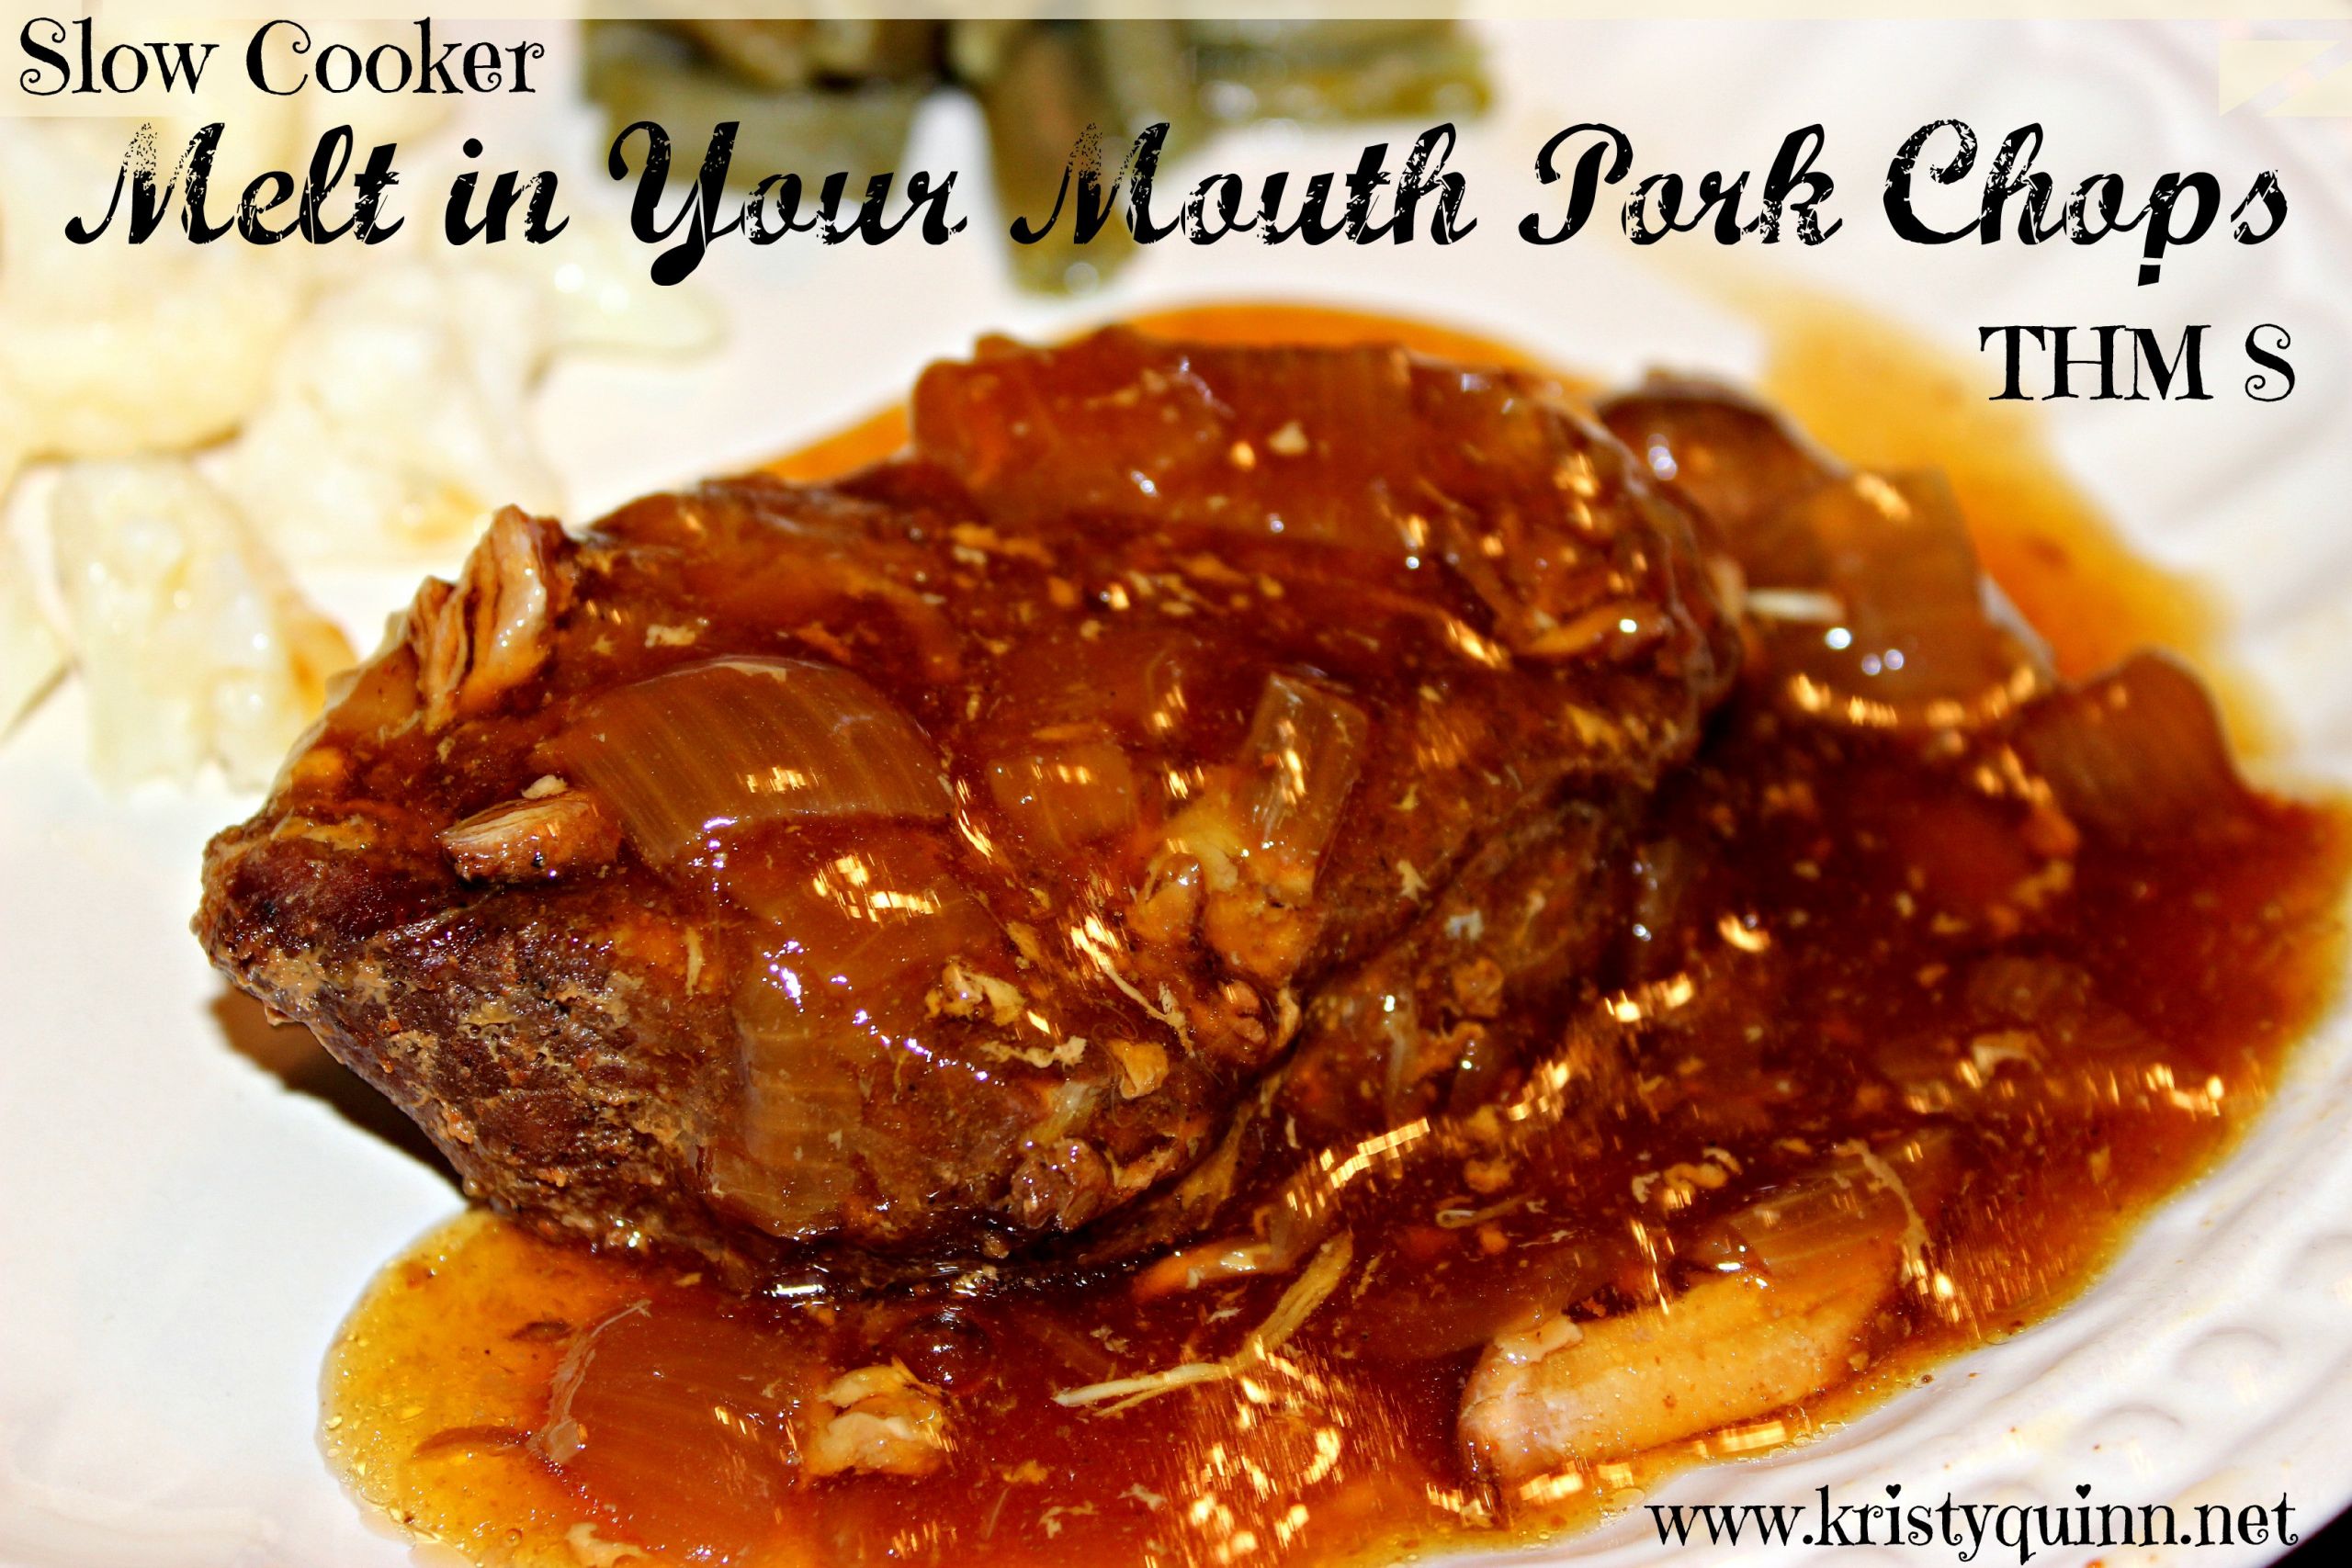 Pork Loin Chops Slow Cooker Recipes
 Slow Cooker Melt in Your Mouth Pork Chops THM S